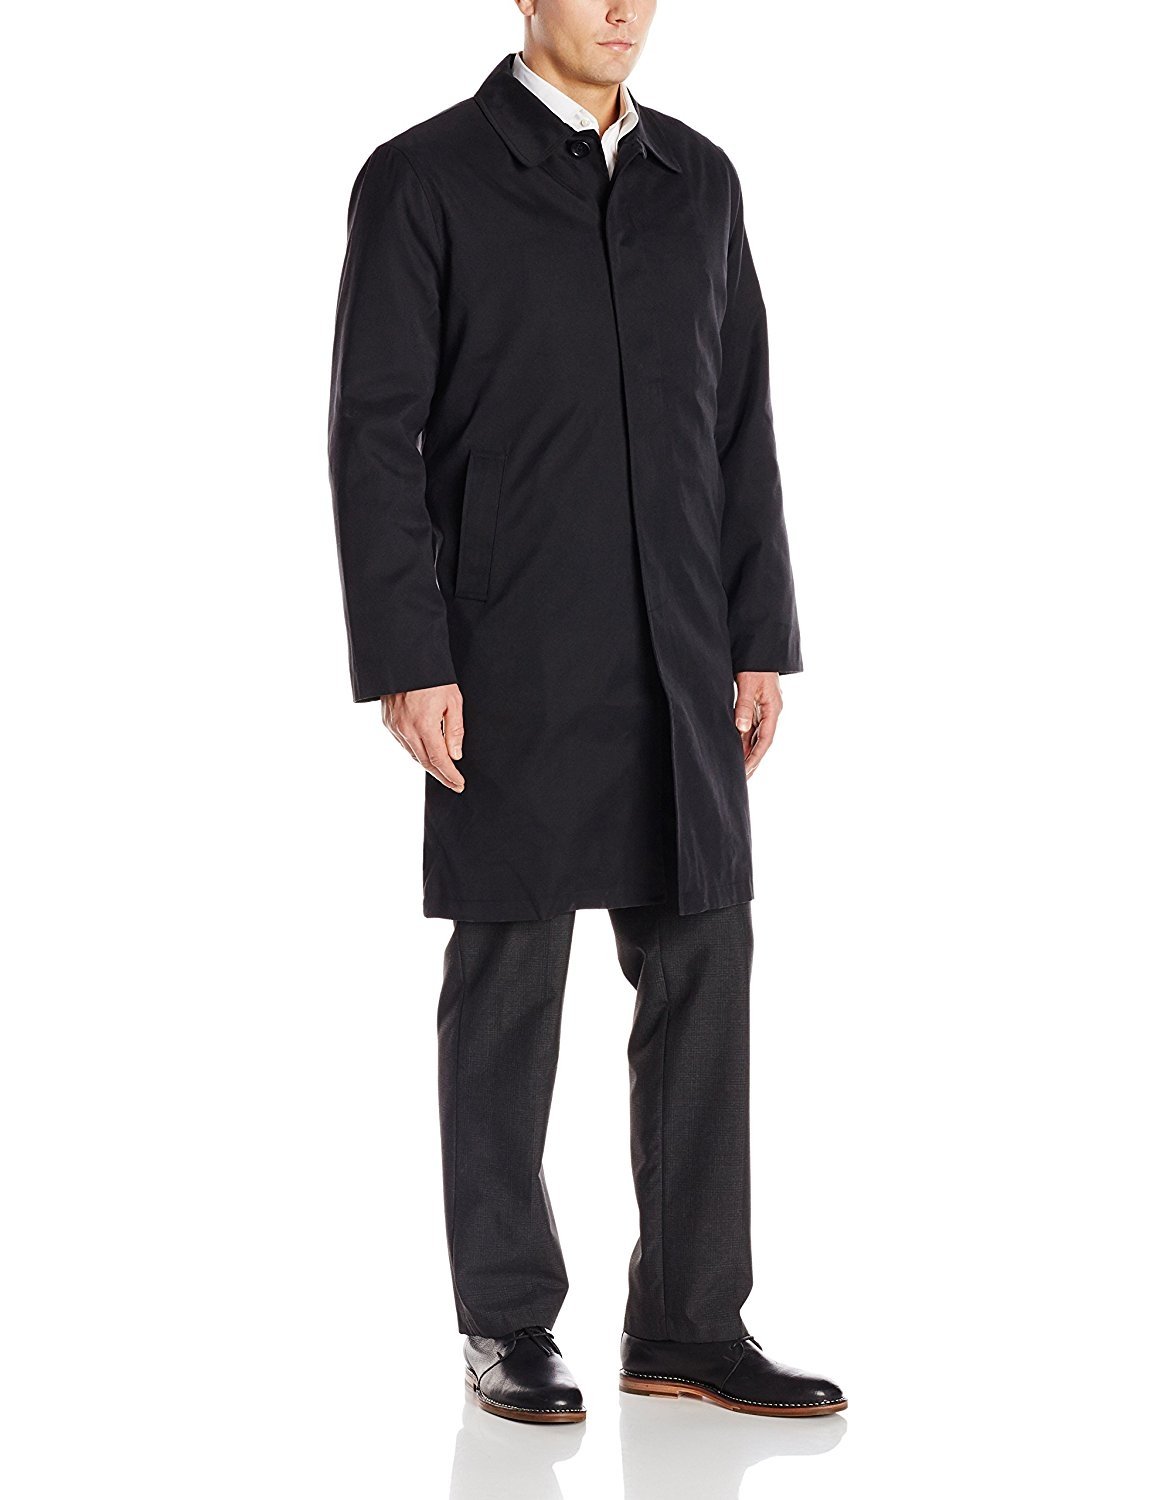 Pre-owned London Fog Men's Durham Rain Coat With Zip-out Body In Black